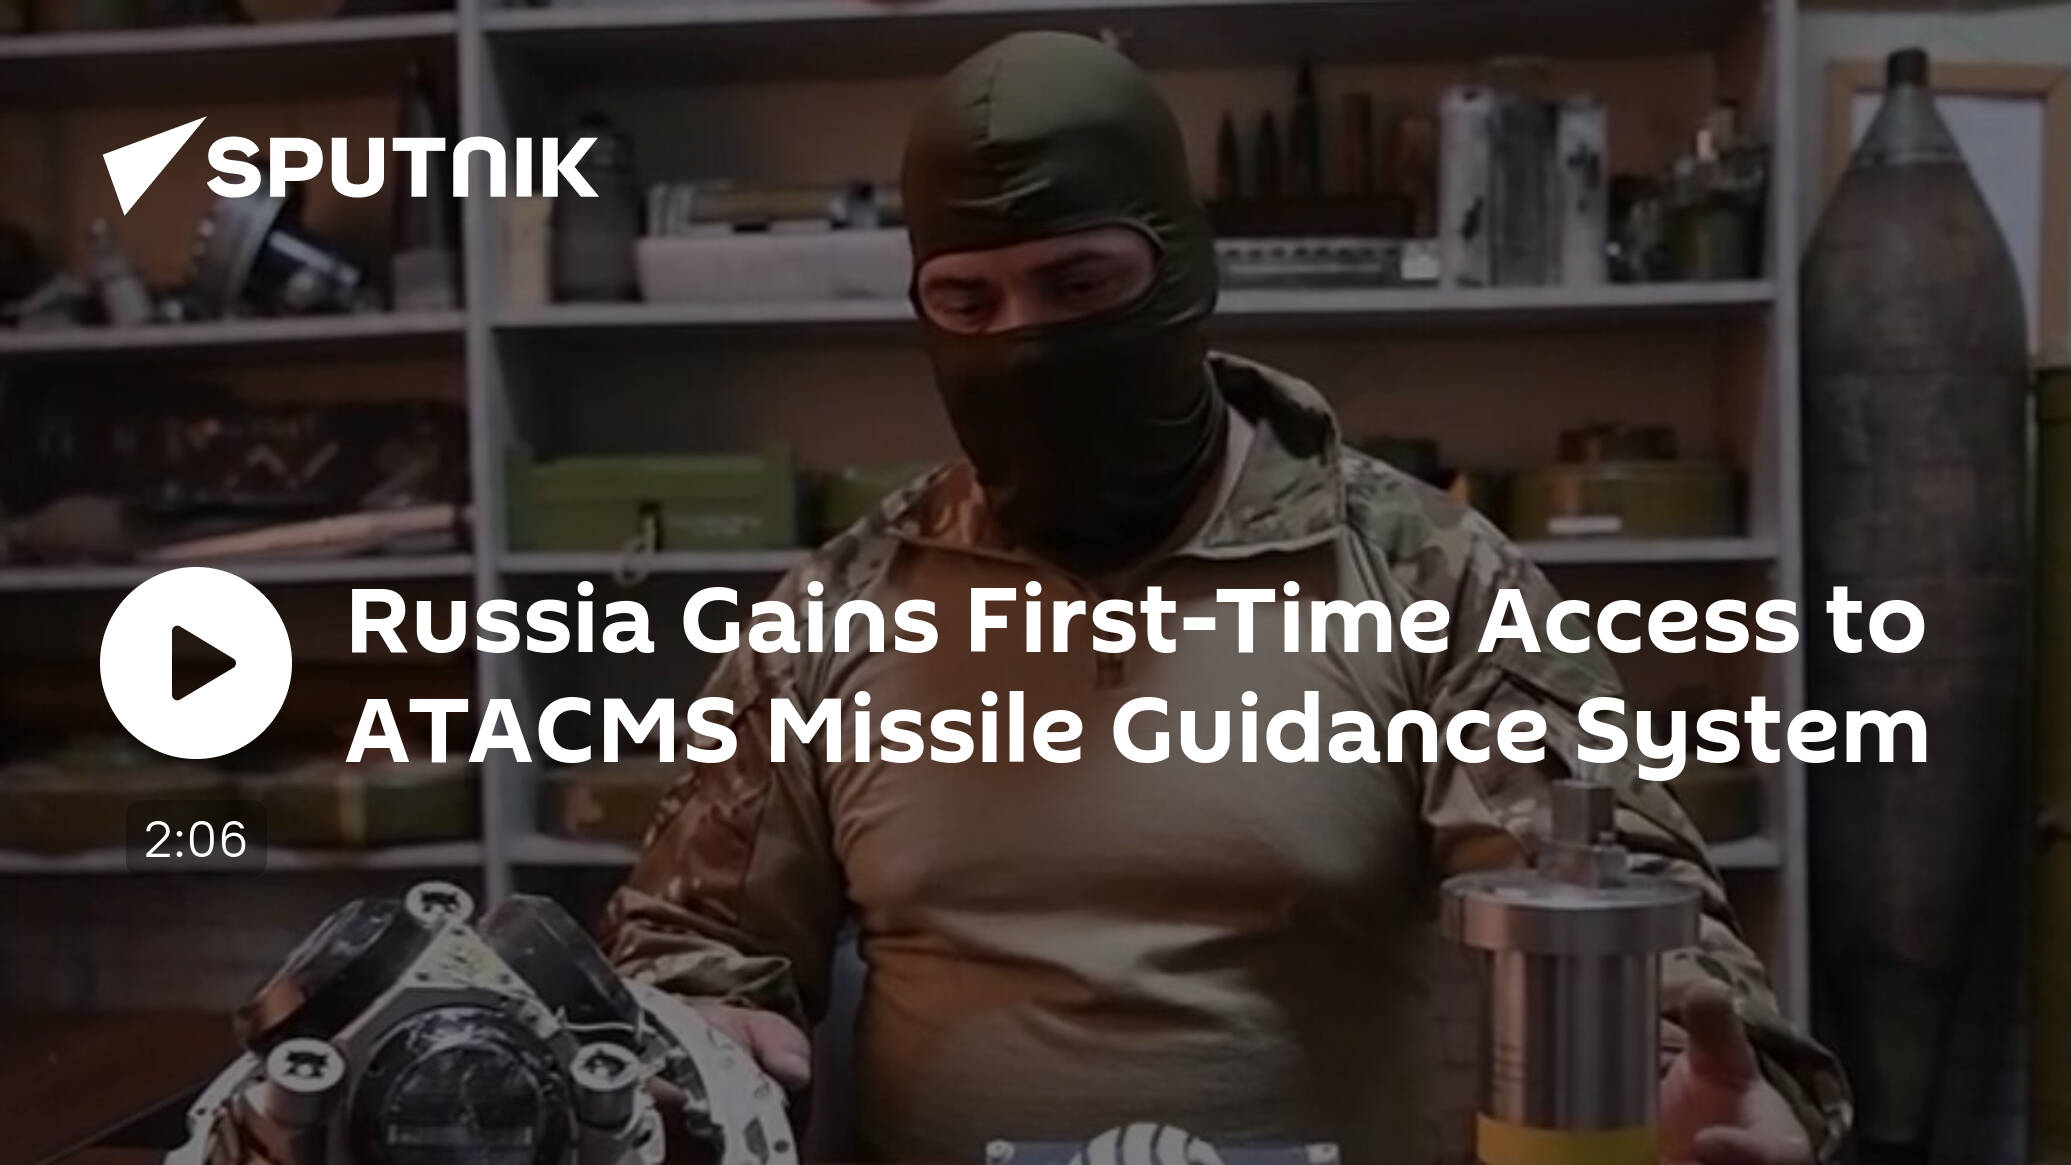 Russia Gains First-Time Access to ATACMS Missile Guidance System